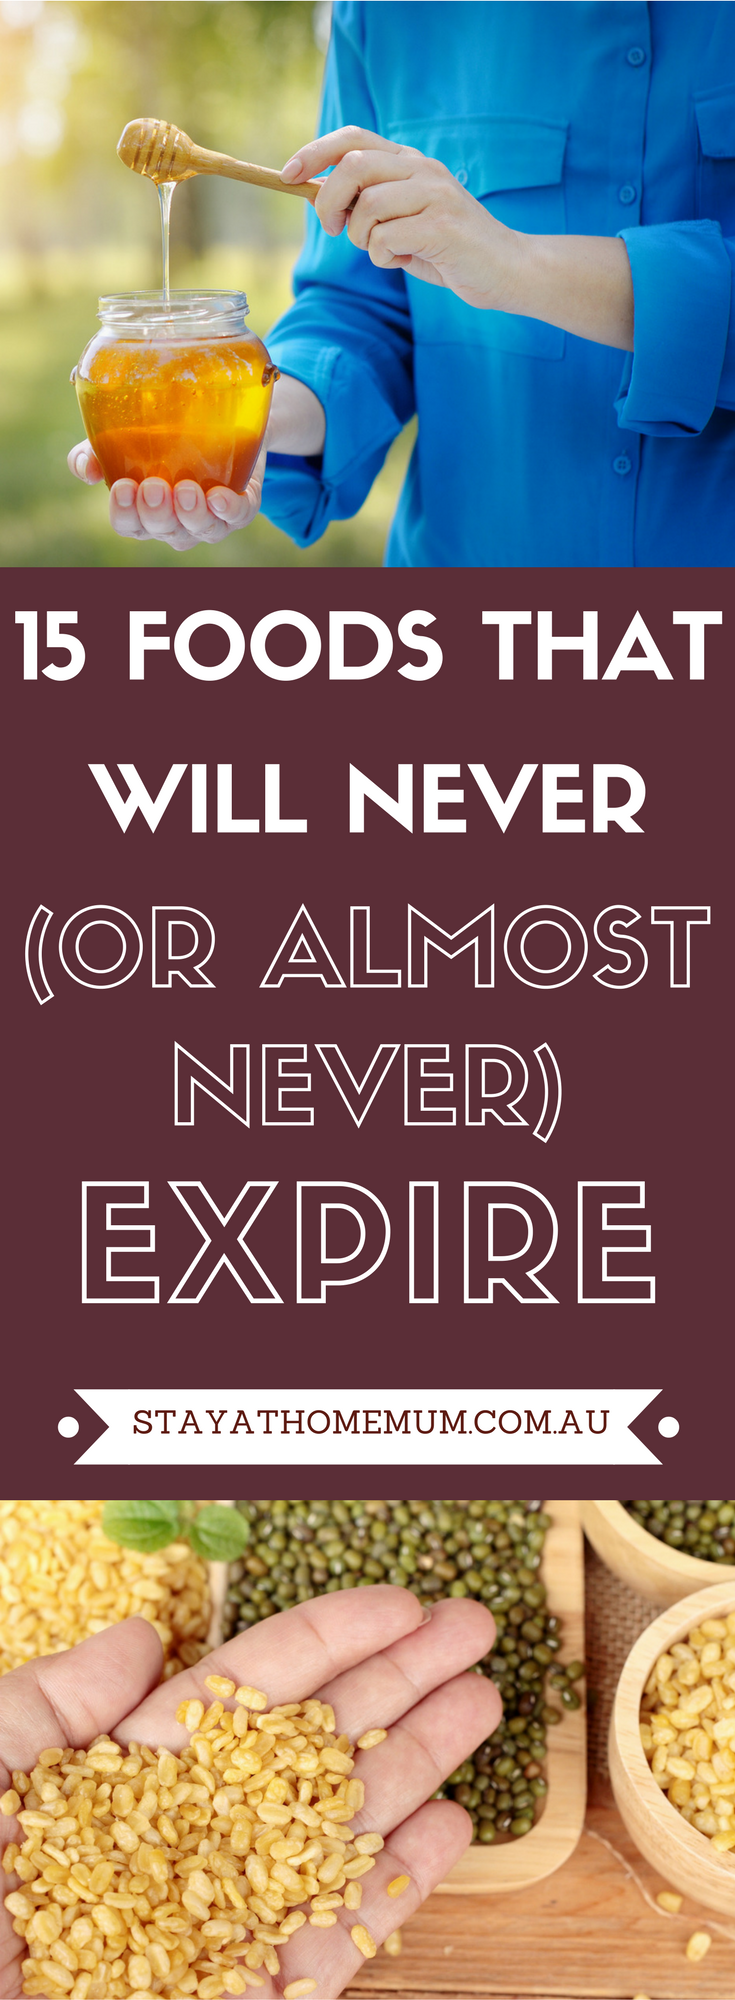 15 Foods That Will Never (Or Almost Never) Expire